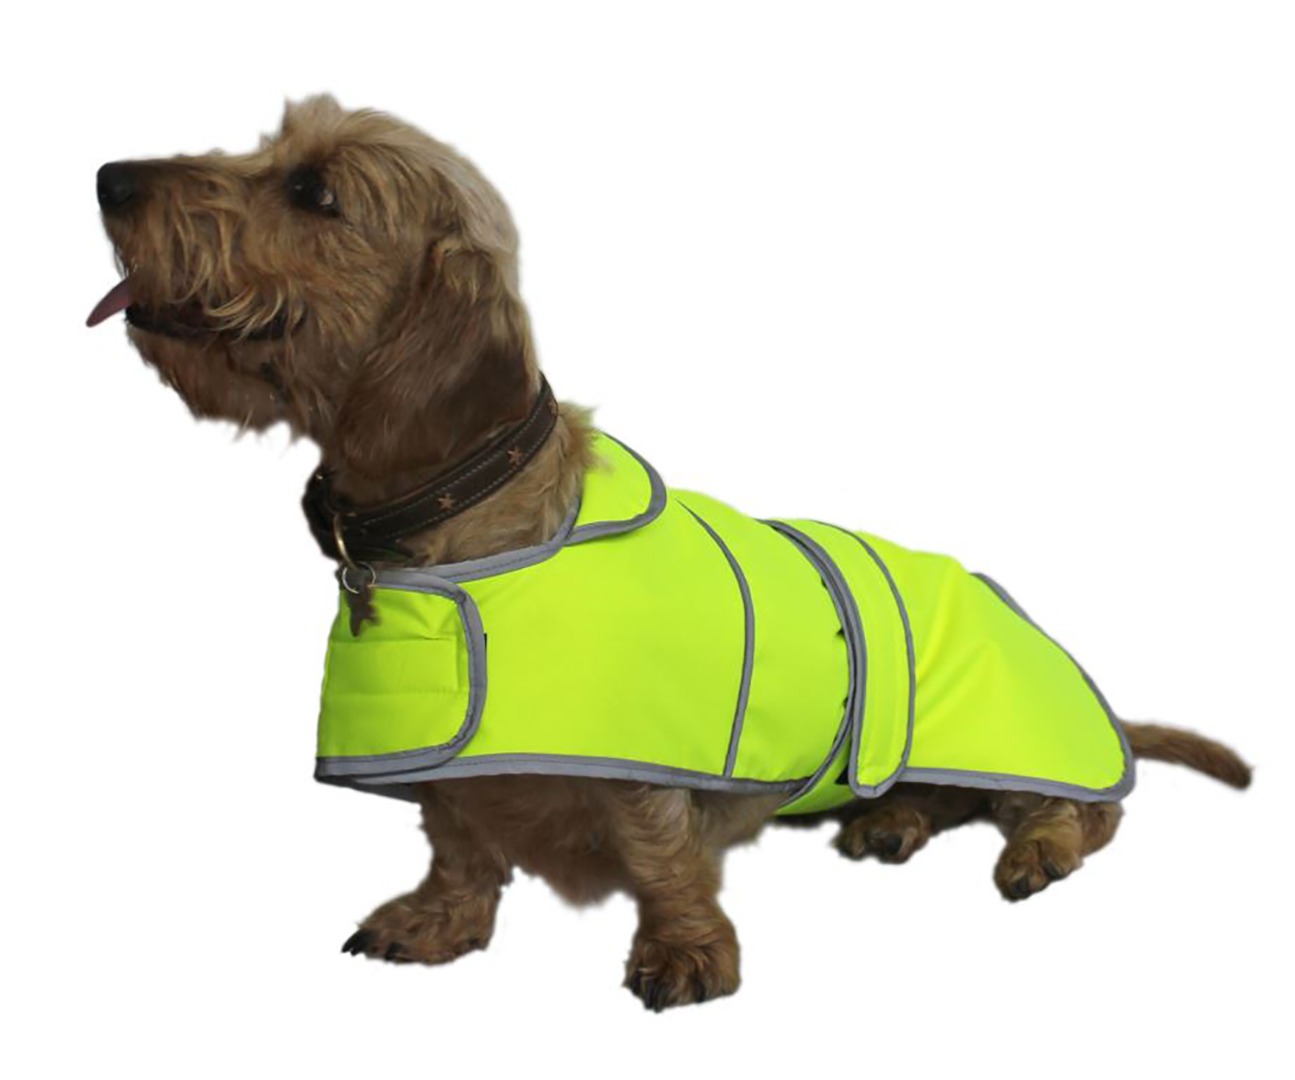 Hi-visibility Safety Dog Coat, designed specifically for the standard Dachshund